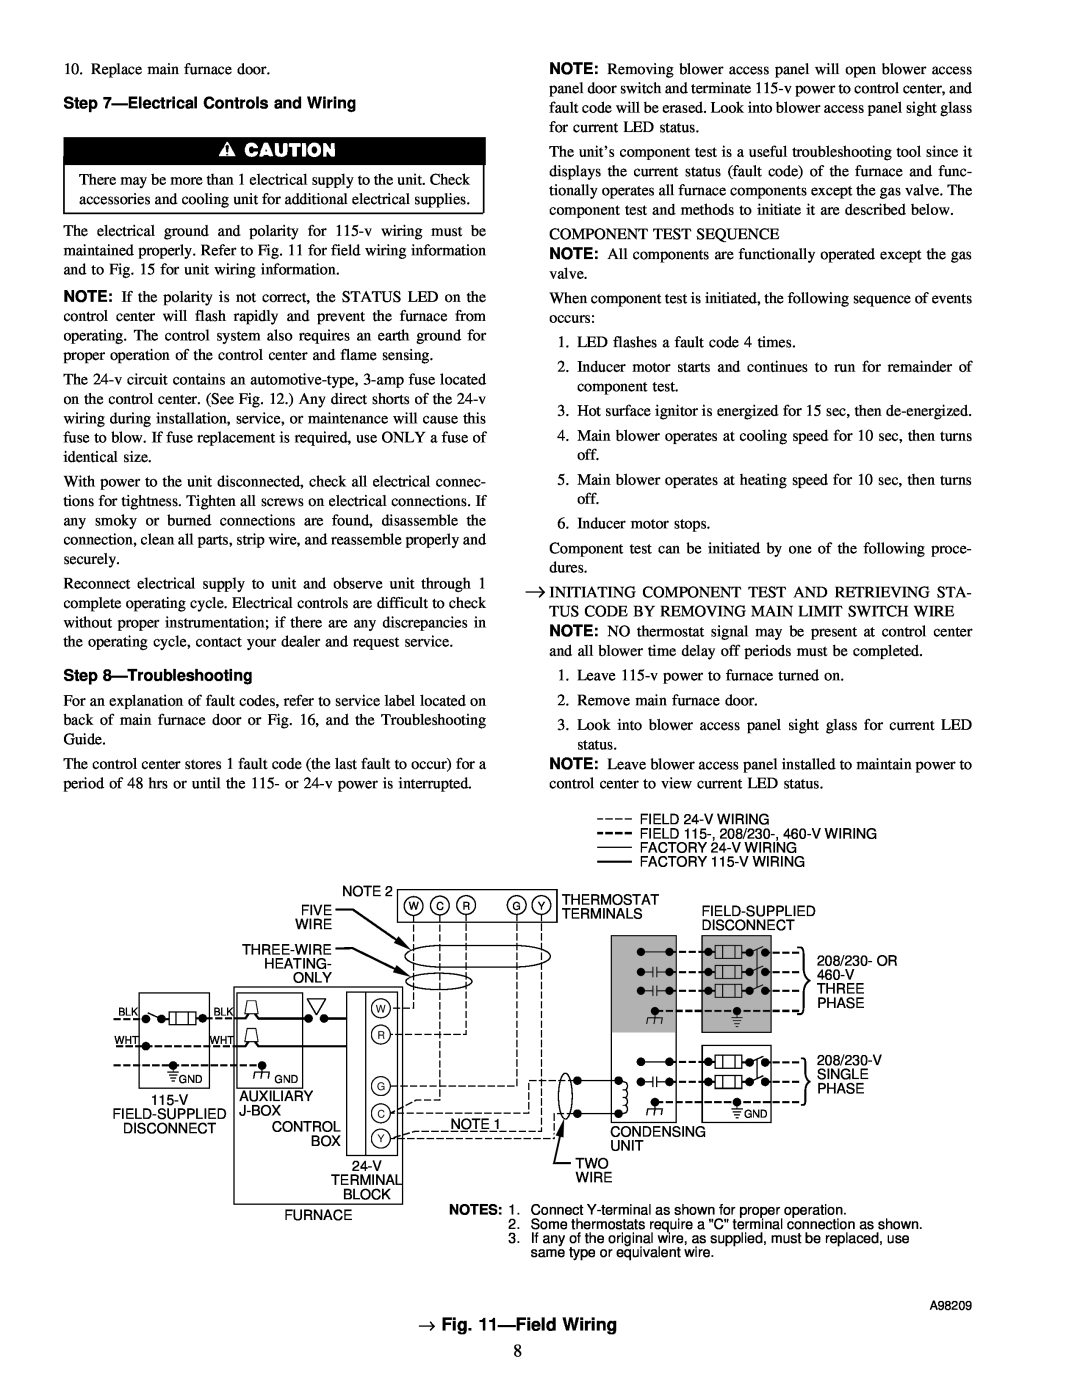 Carrier 58MSA instruction manual → ÐField Wiring, ÐElectrical Controls and Wiring, ÐTroubleshooting 